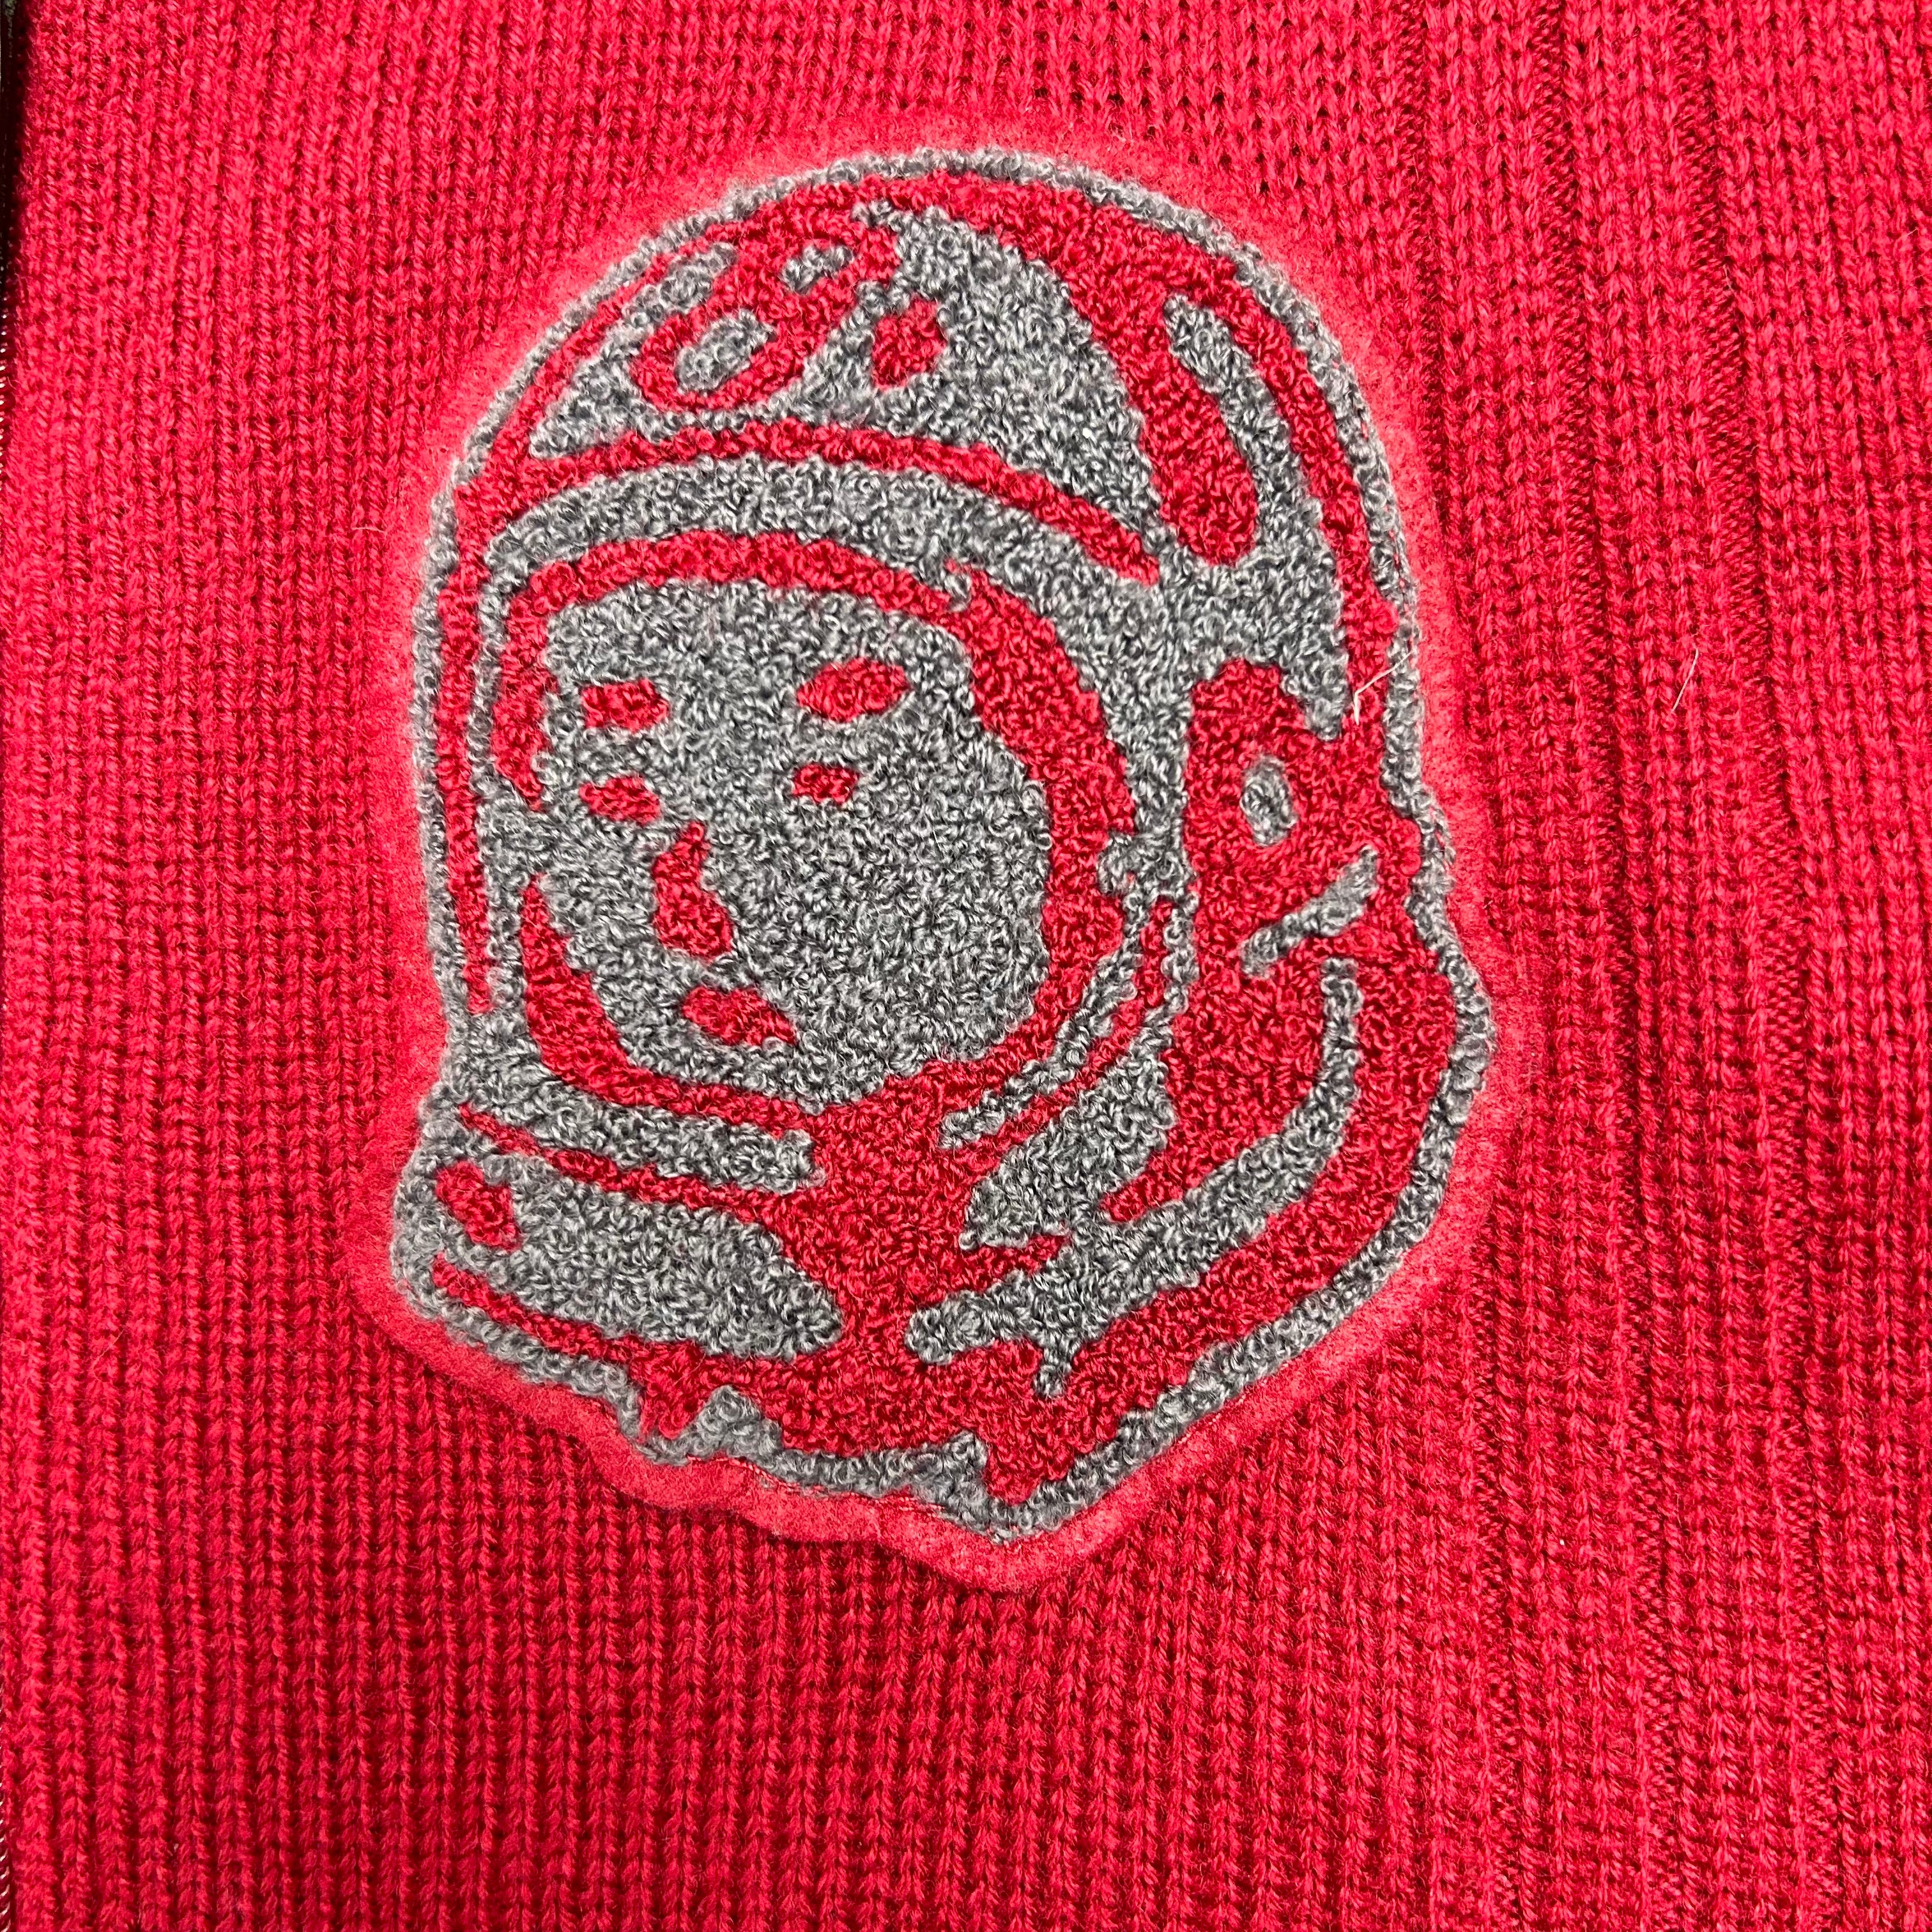 Billionaire Boys Club College Knit Sweater Red